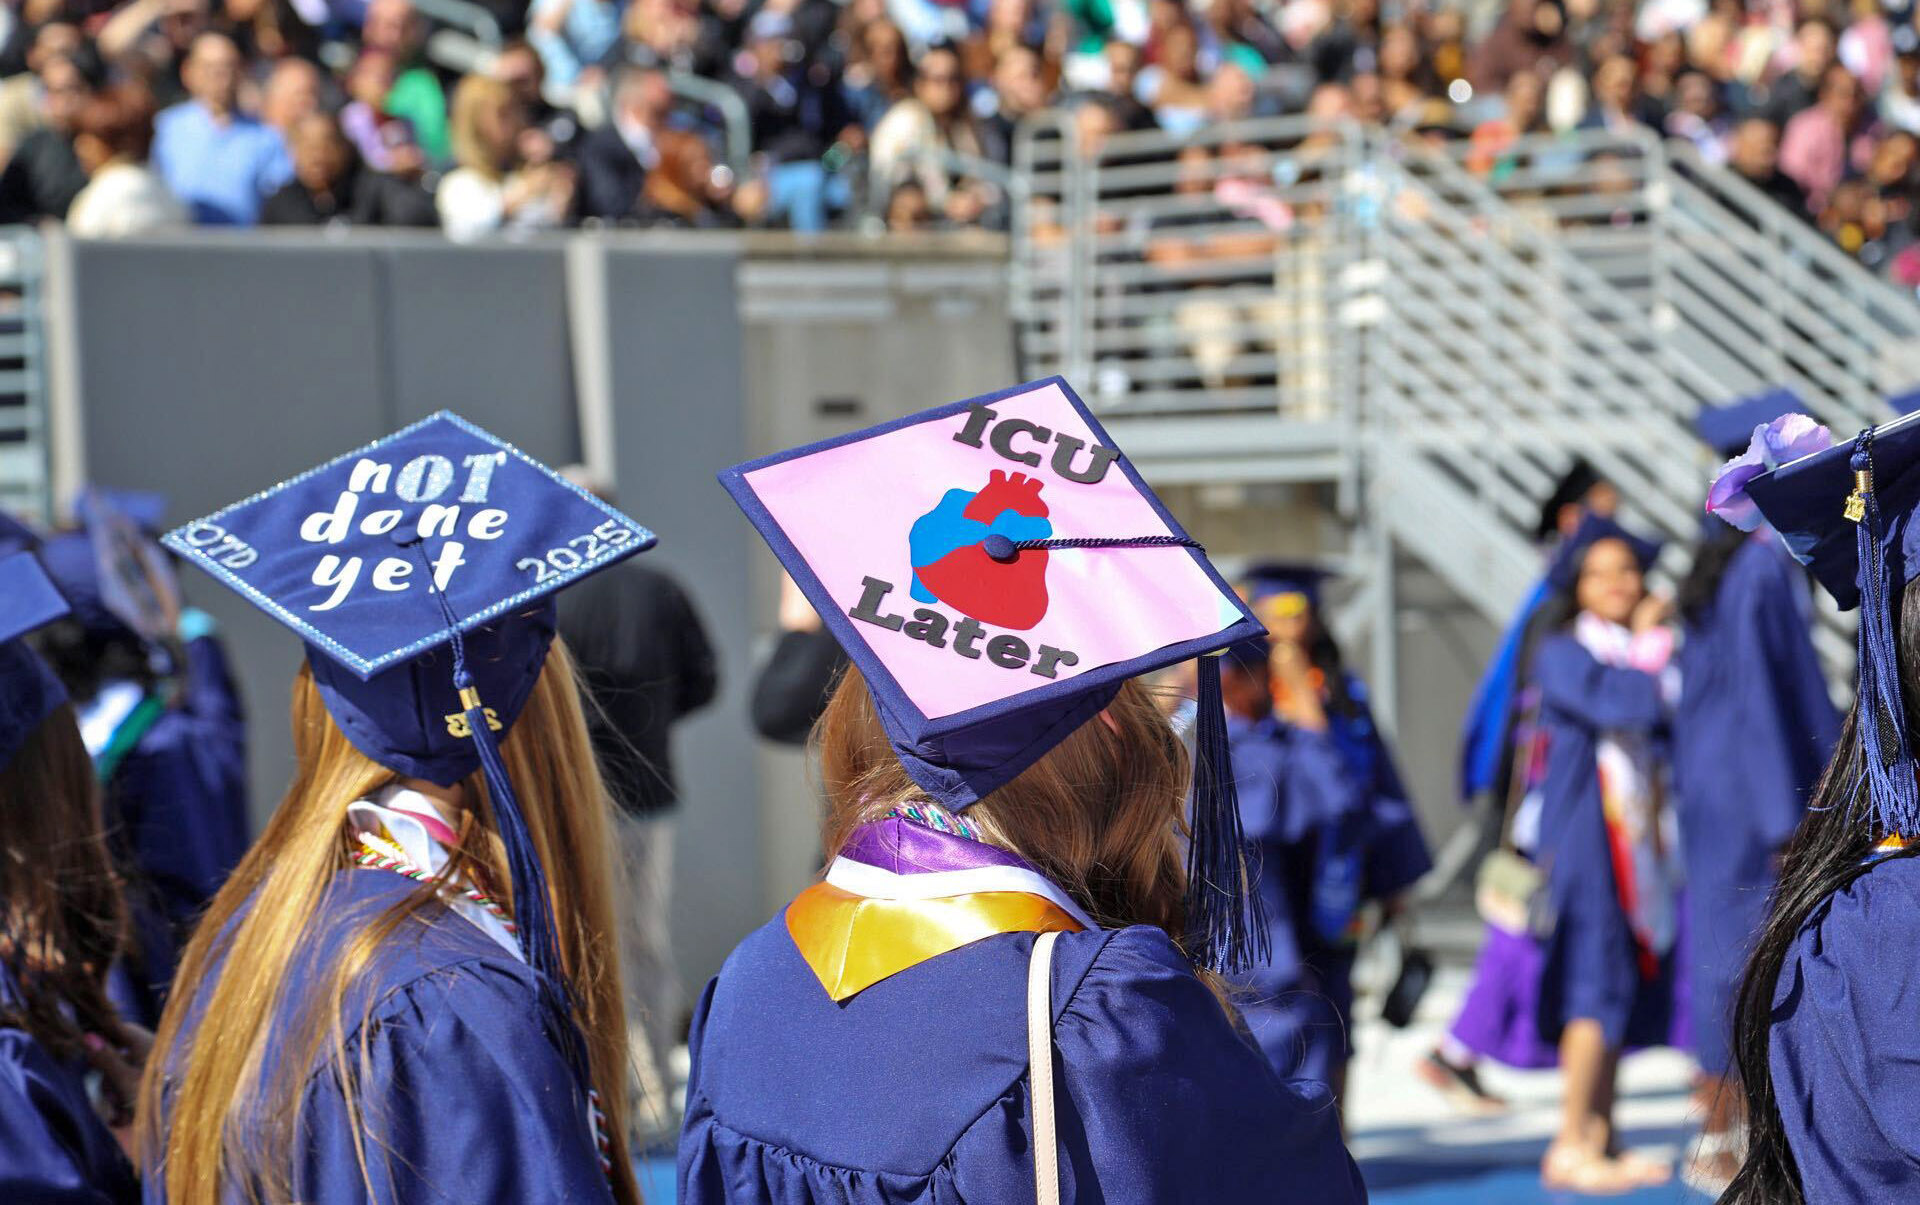 Decorated caps dot the crowd of graduates.